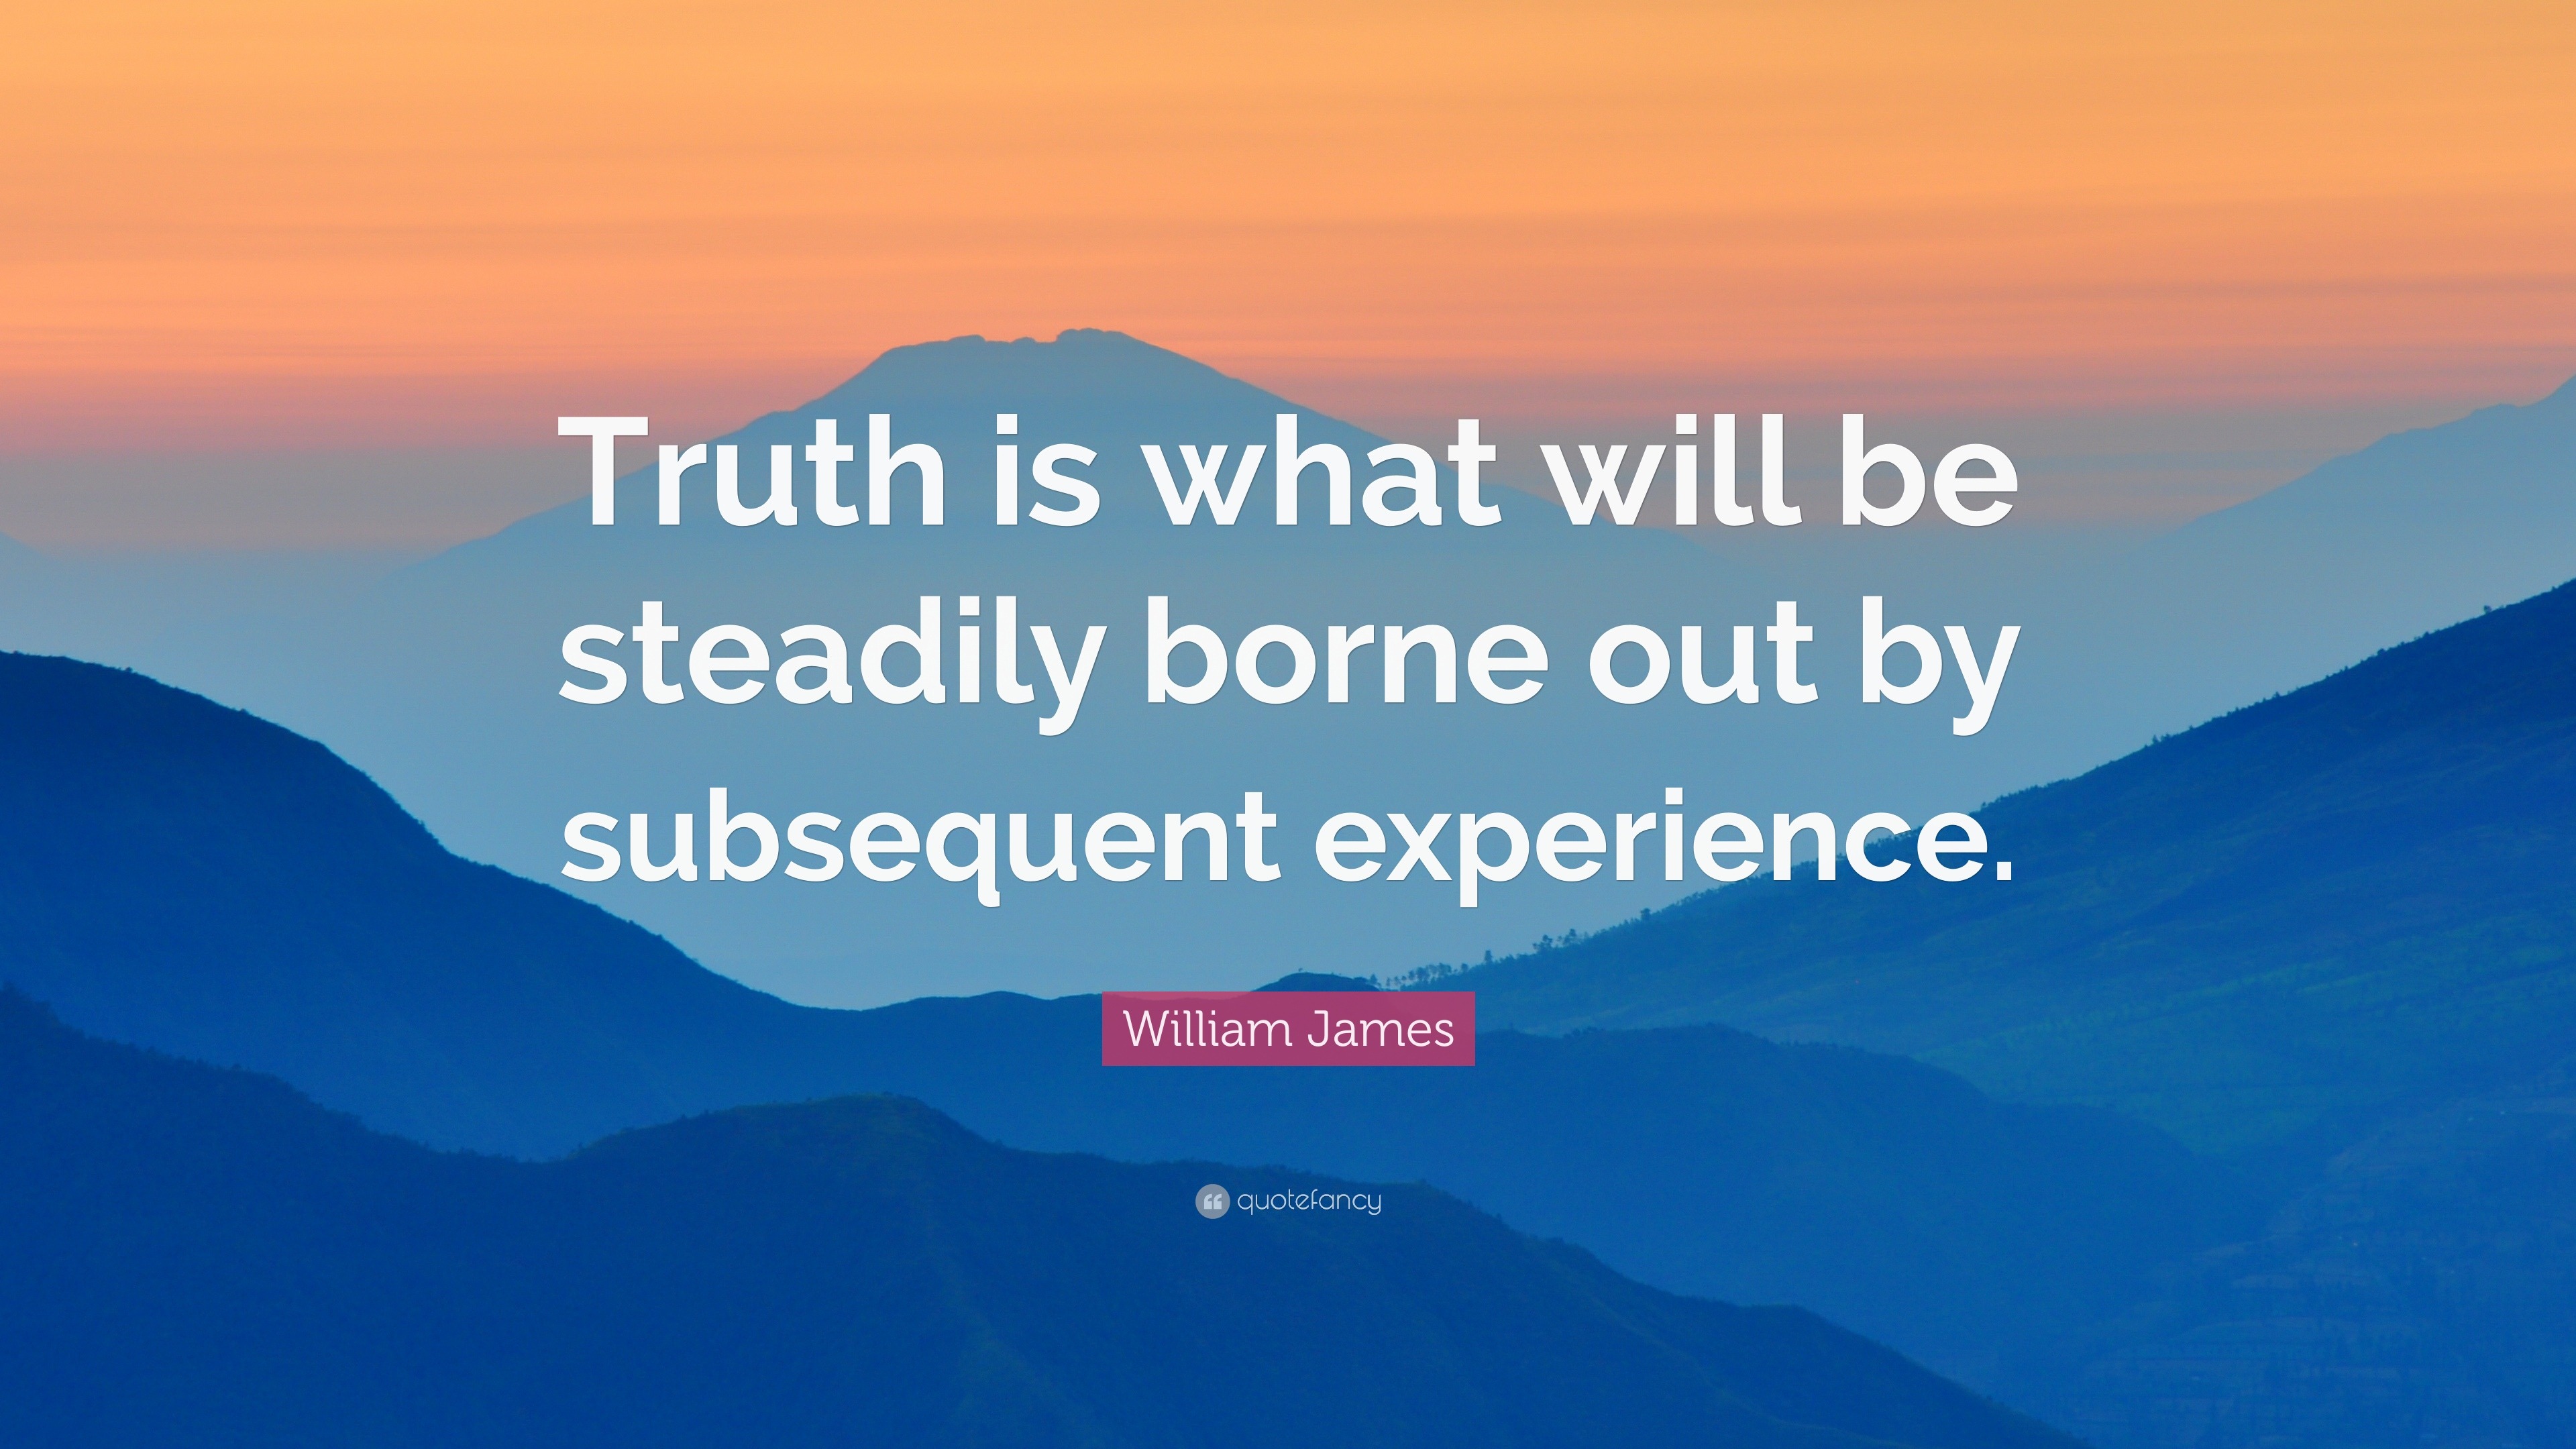 William James Quote: “Truth is what will be steadily borne out by ...